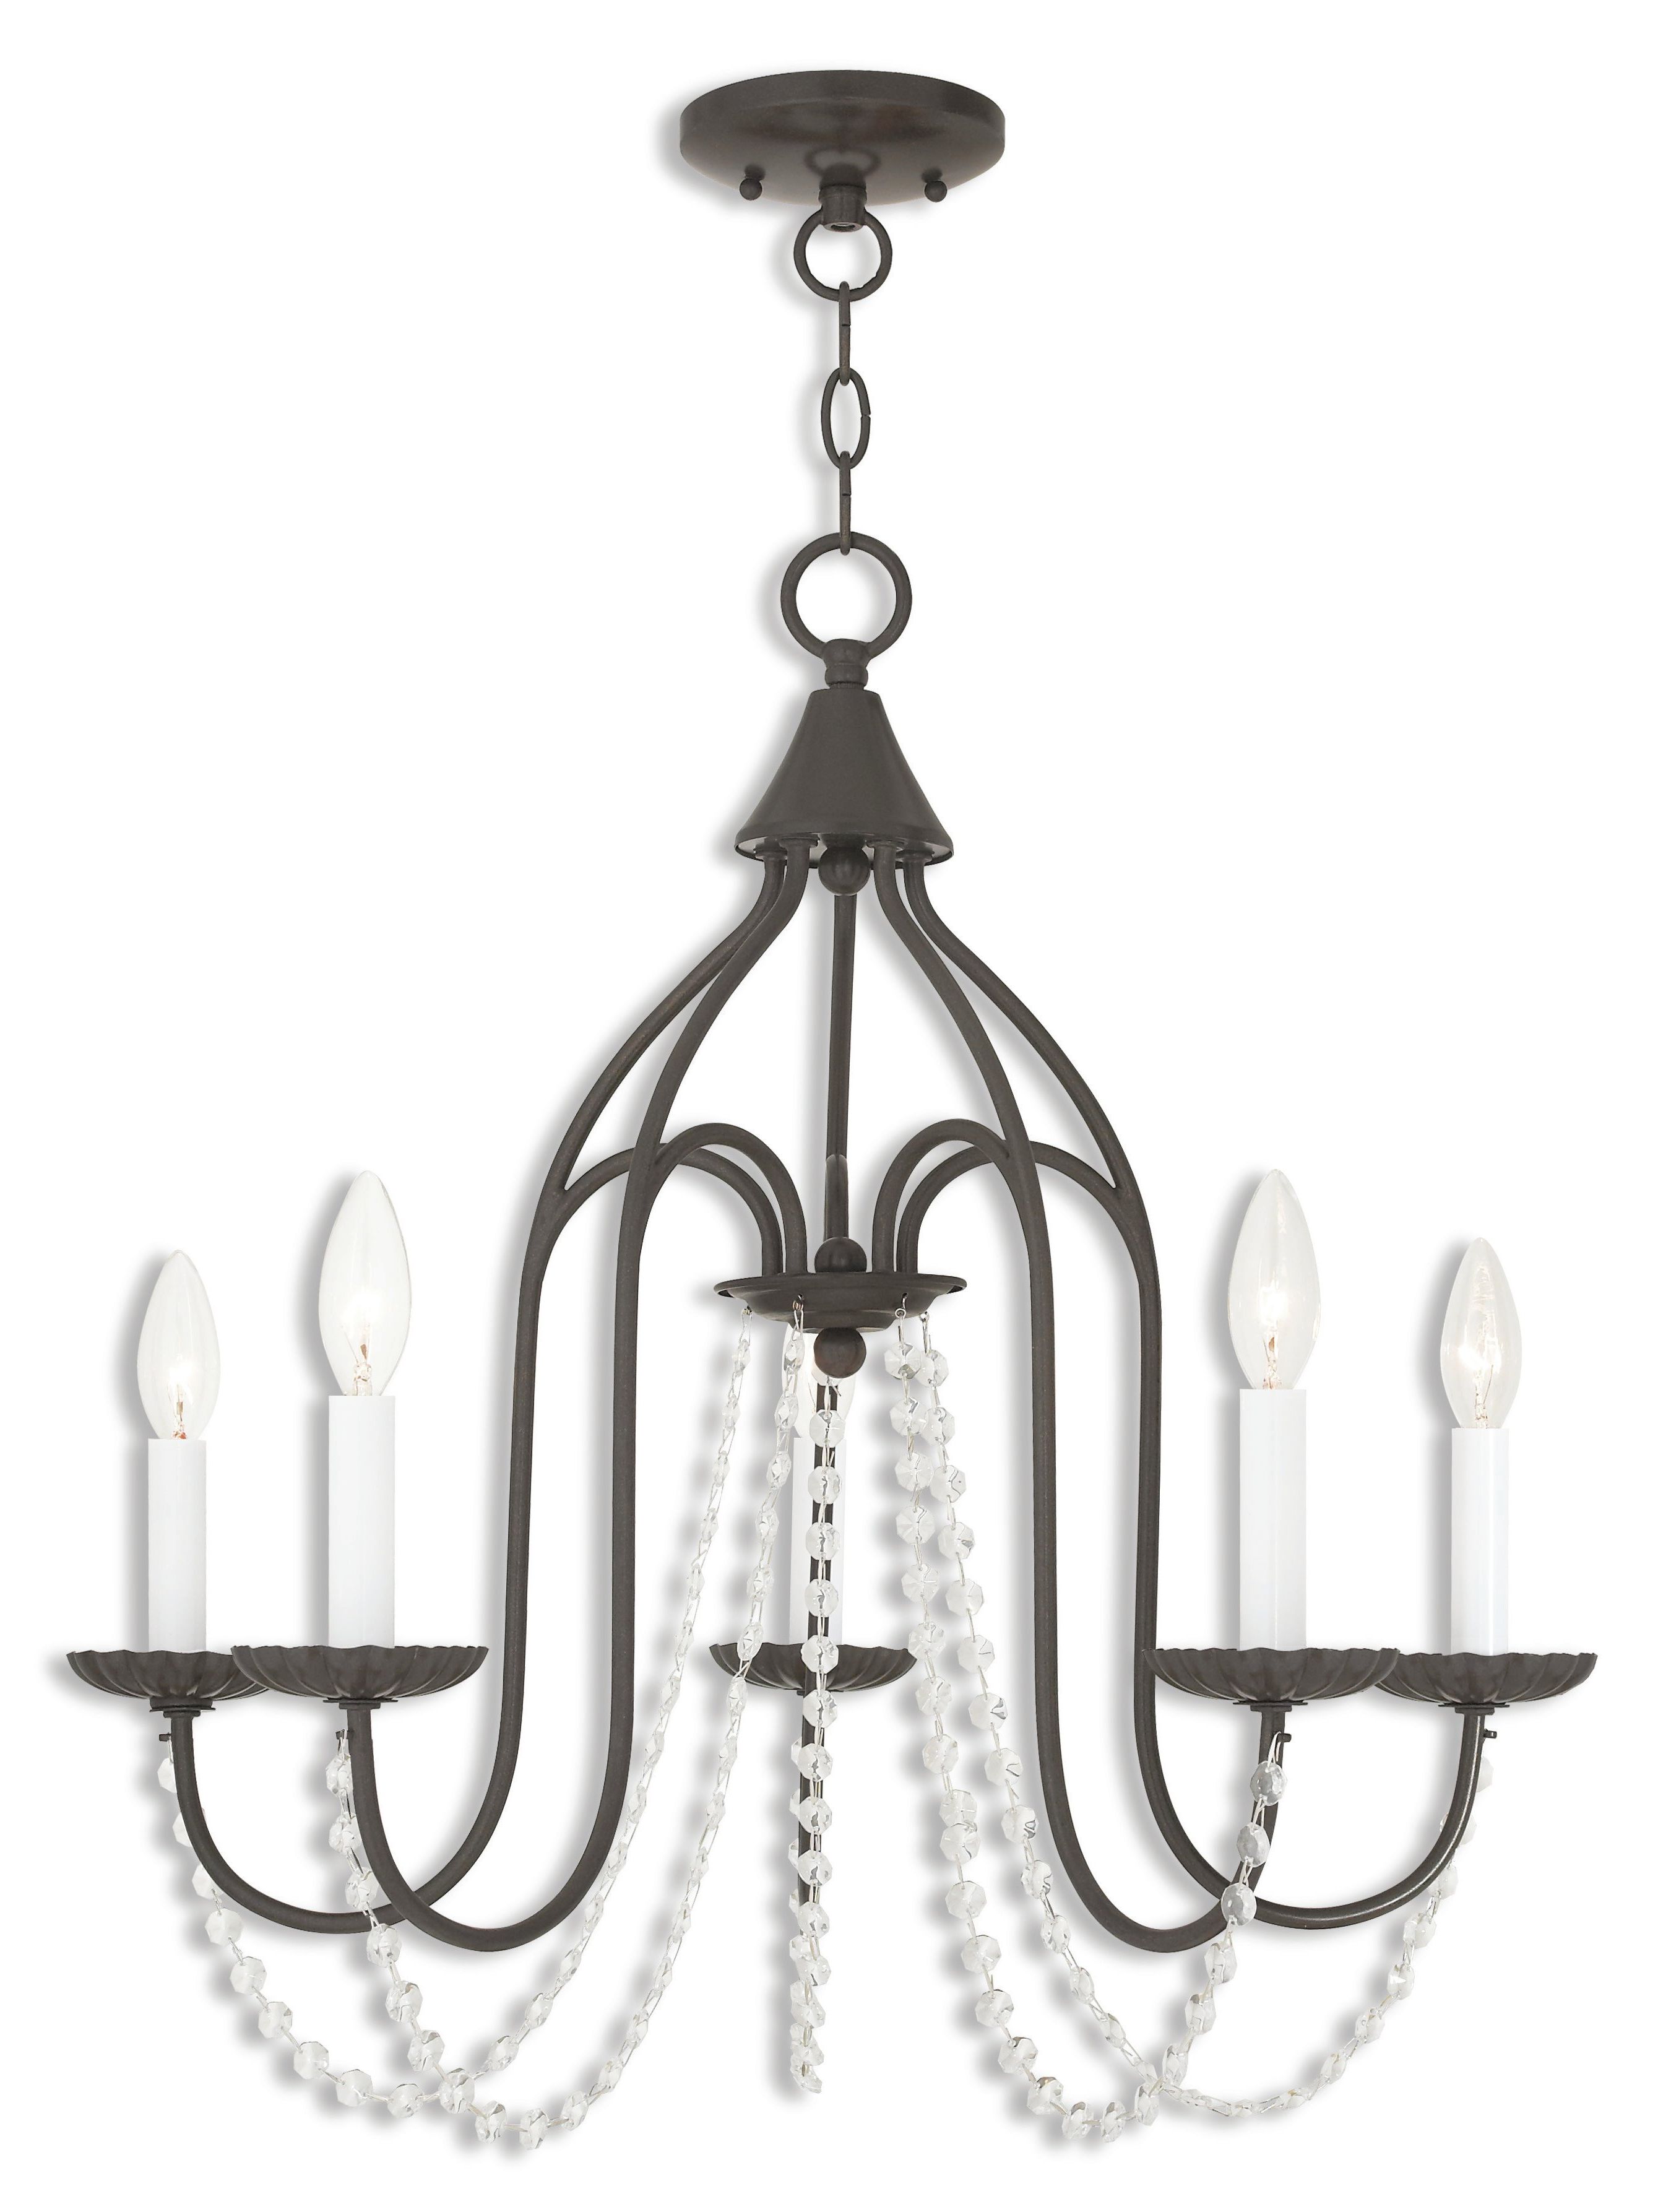 Florentina 5 Light Candle Style Chandelier In Best And Newest Watford 9 Light Candle Style Chandeliers (View 20 of 25)